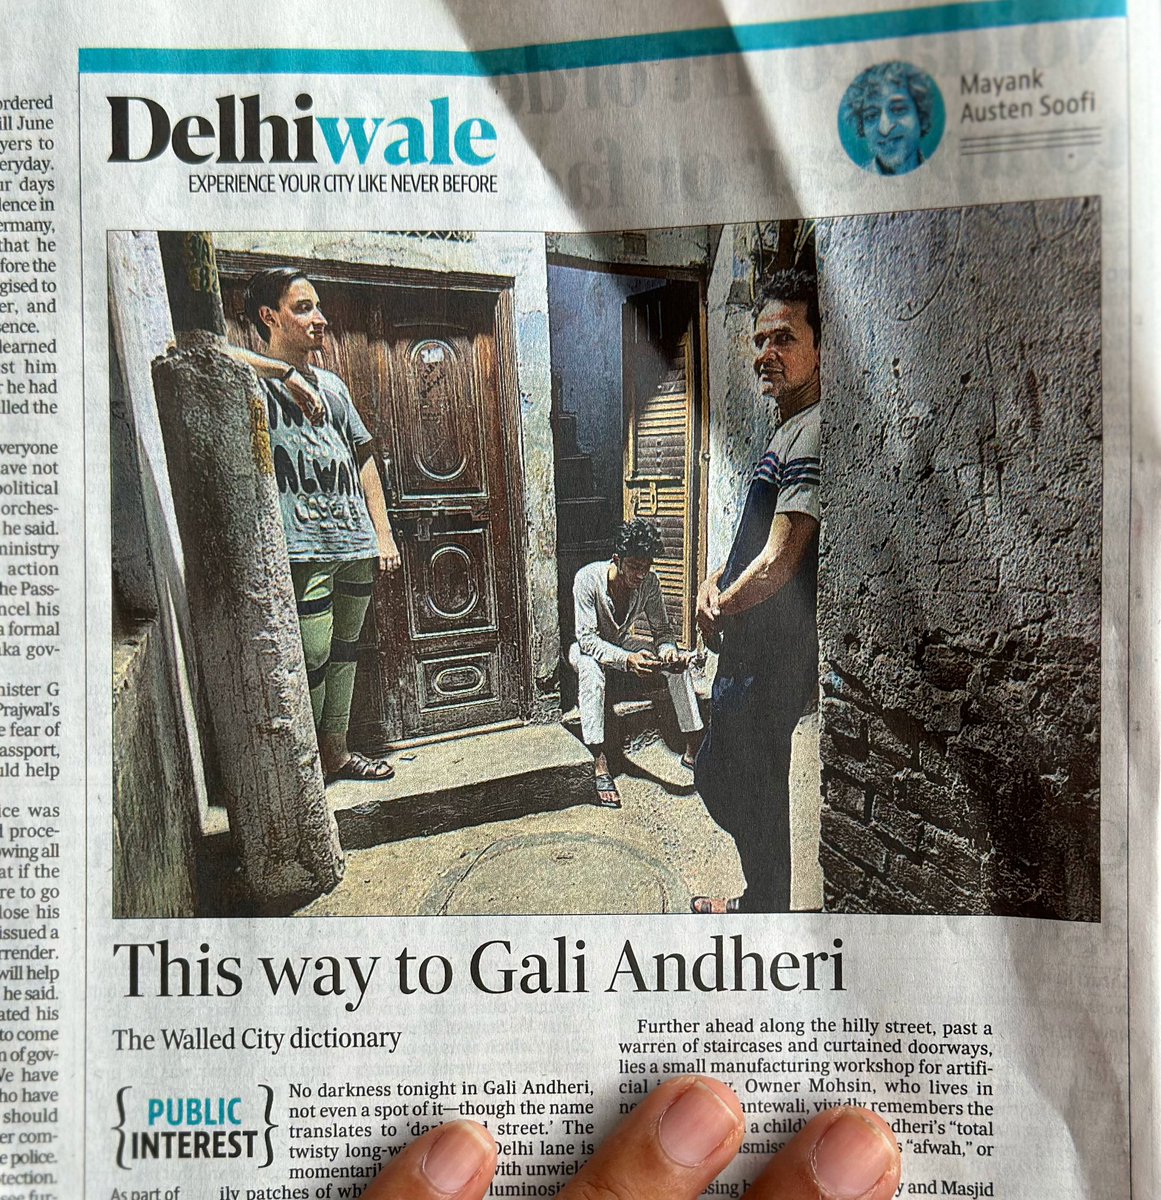 As part of my mission to chronicle every street of historic Okd Delhi, here is Gali Andheri, the darkened street… my daily City Life dispatch in Hindustan Times today!